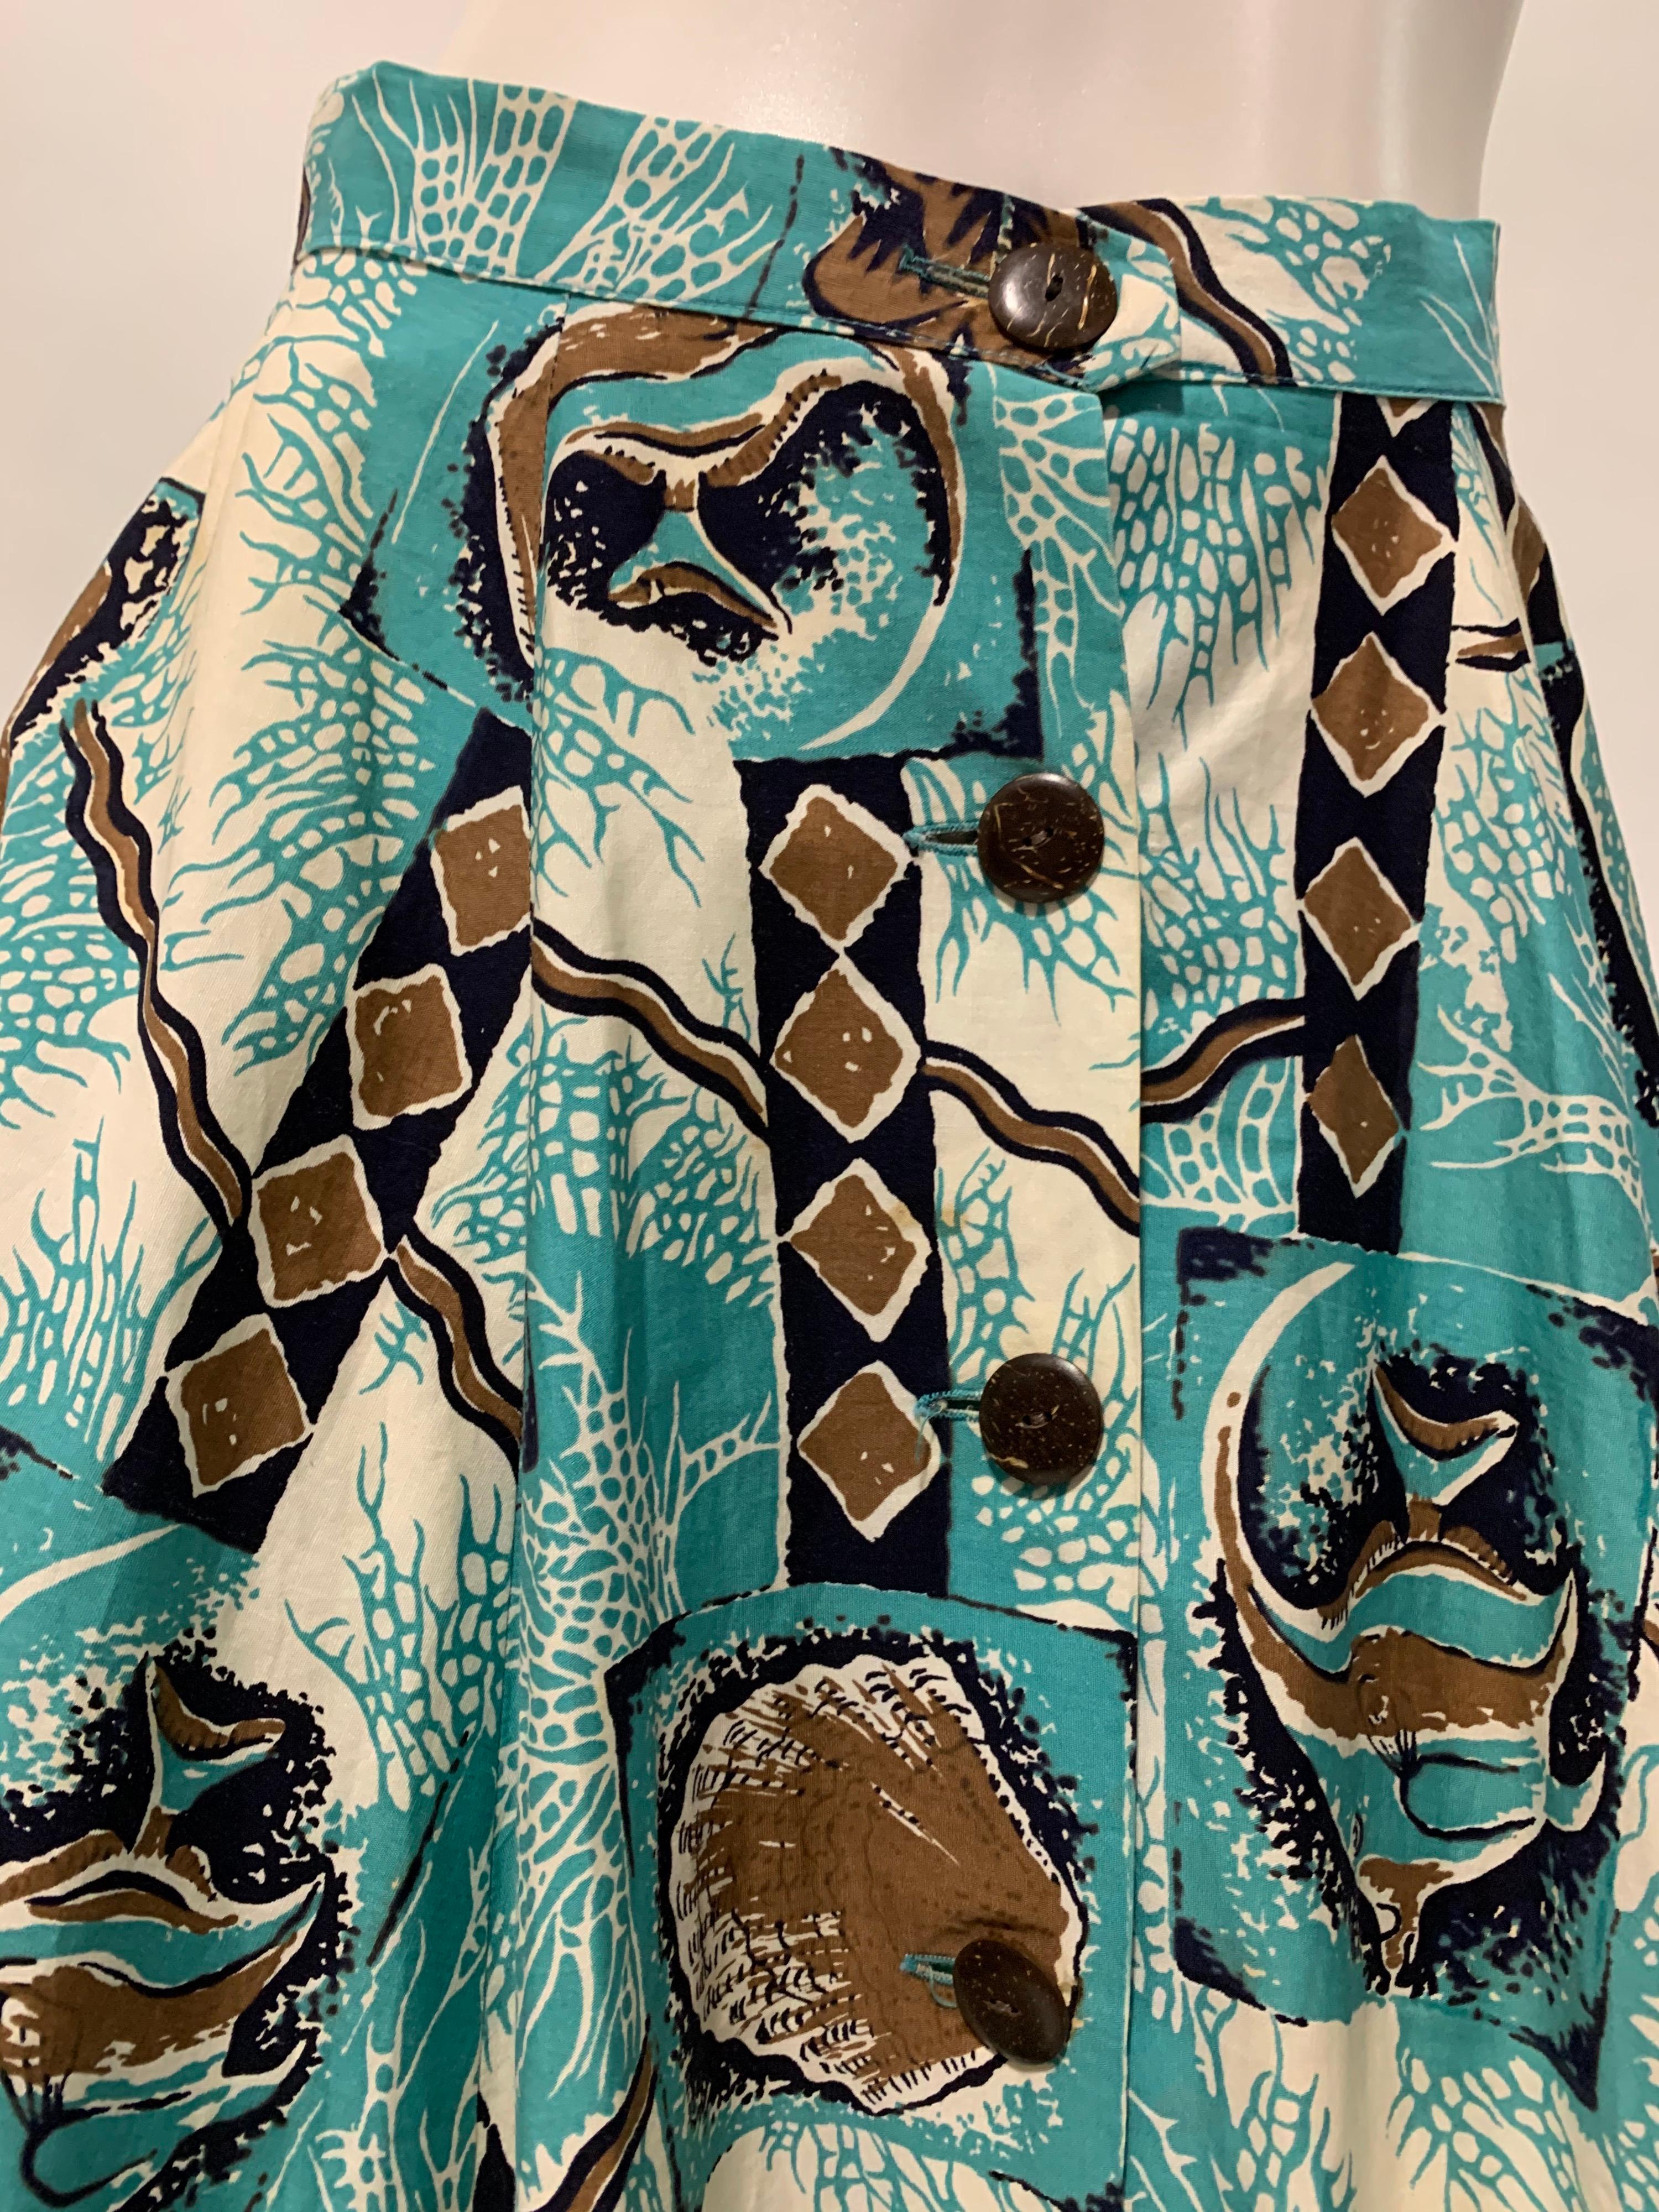 1940s Rare Alfred Shaheen Cotton Tropical Print Coconut Button Front Skirt. Print is turquoise, black, brown and white in palette. Tiki style fun! Size 6.